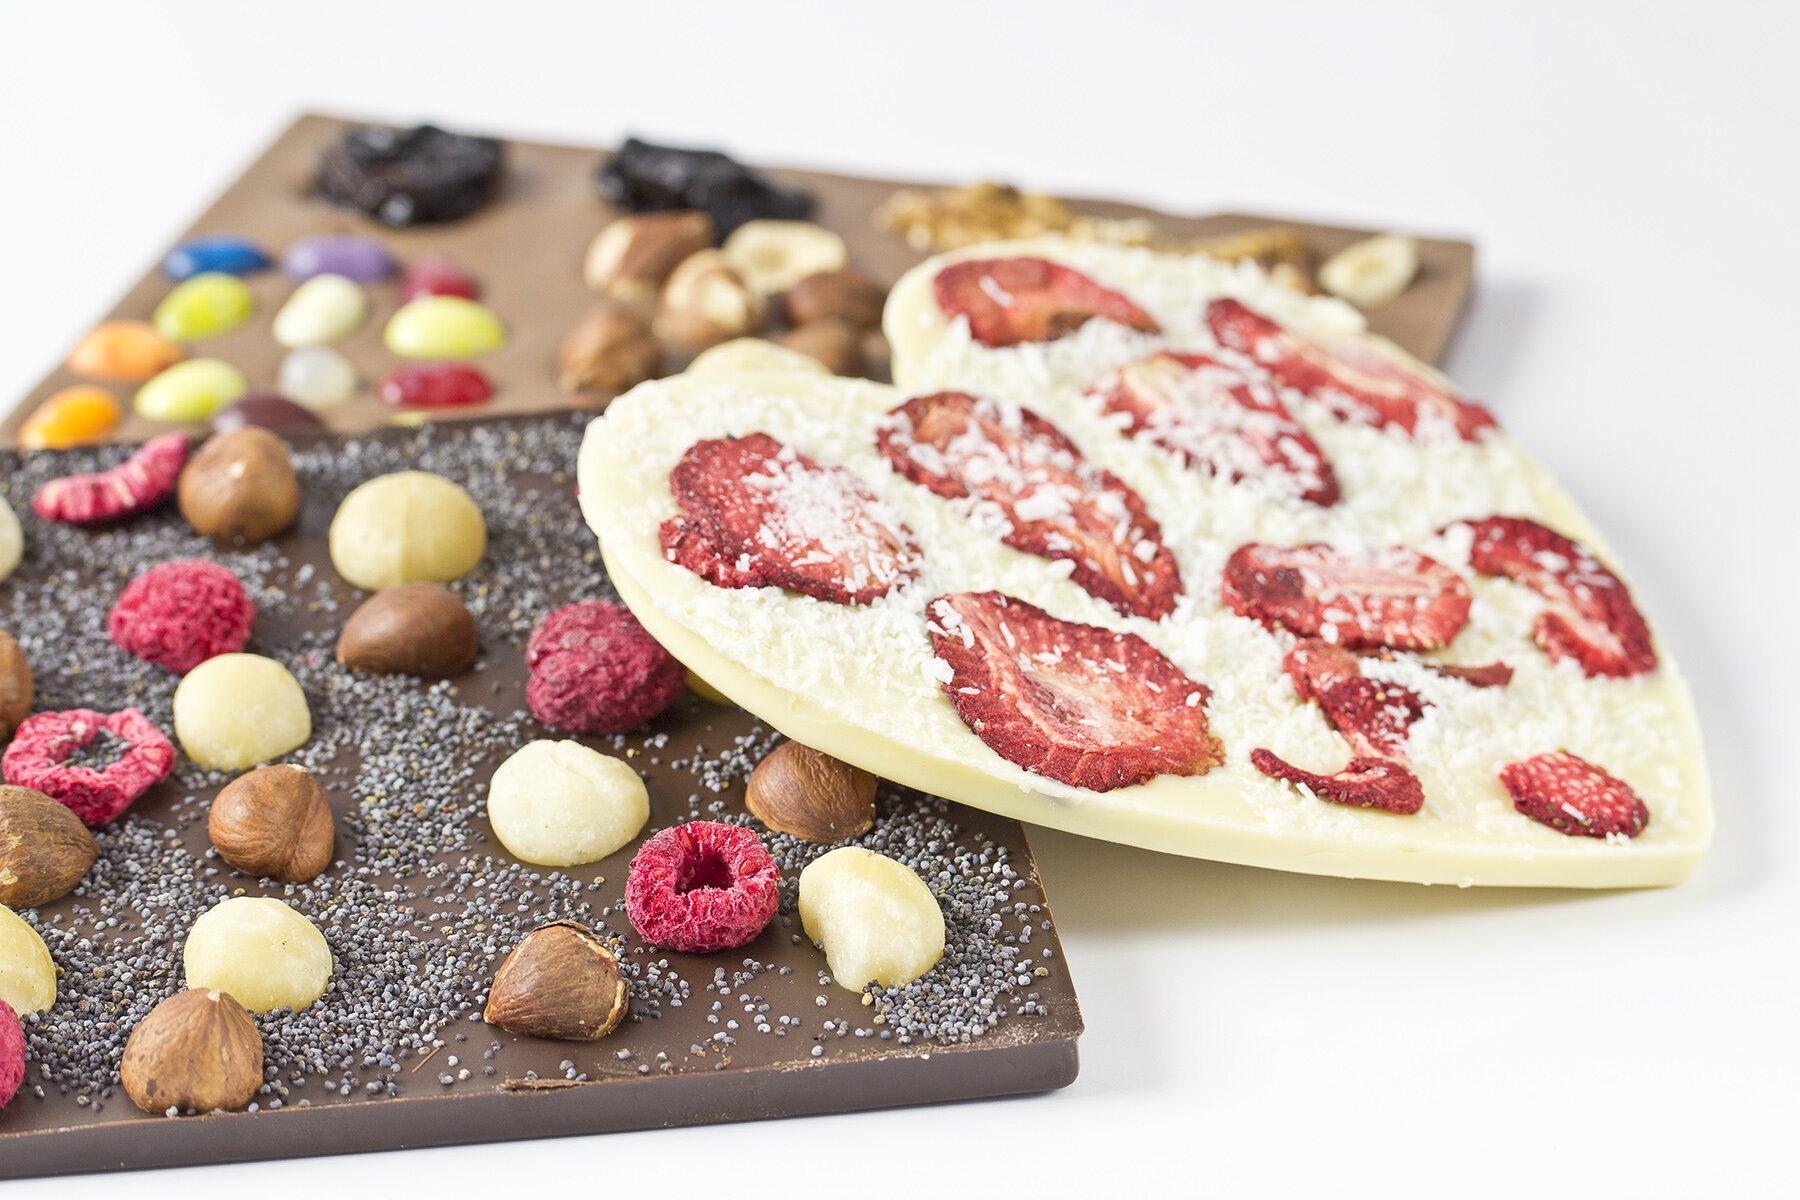 Design your own chocolate tablet